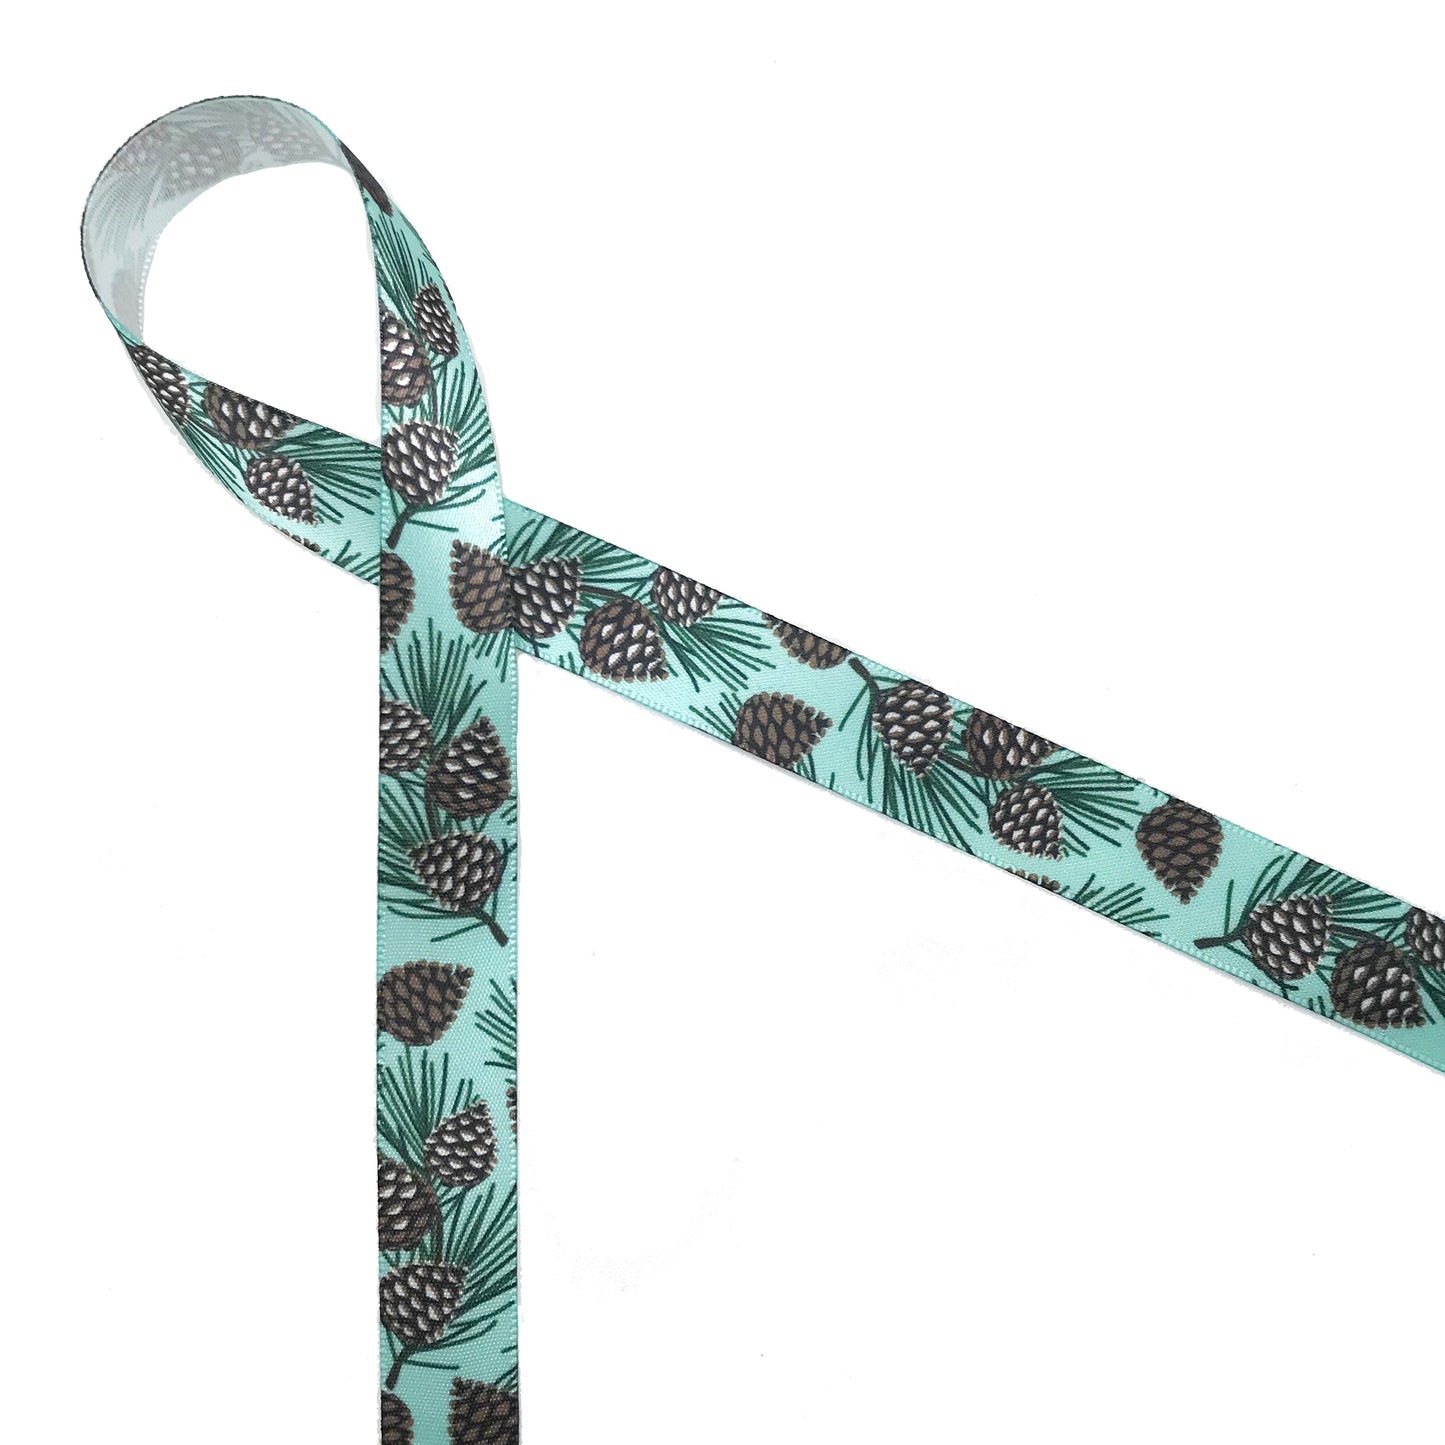 Pine cones ribbon with branches and needles on a white background printed on 5/8" white single face satin